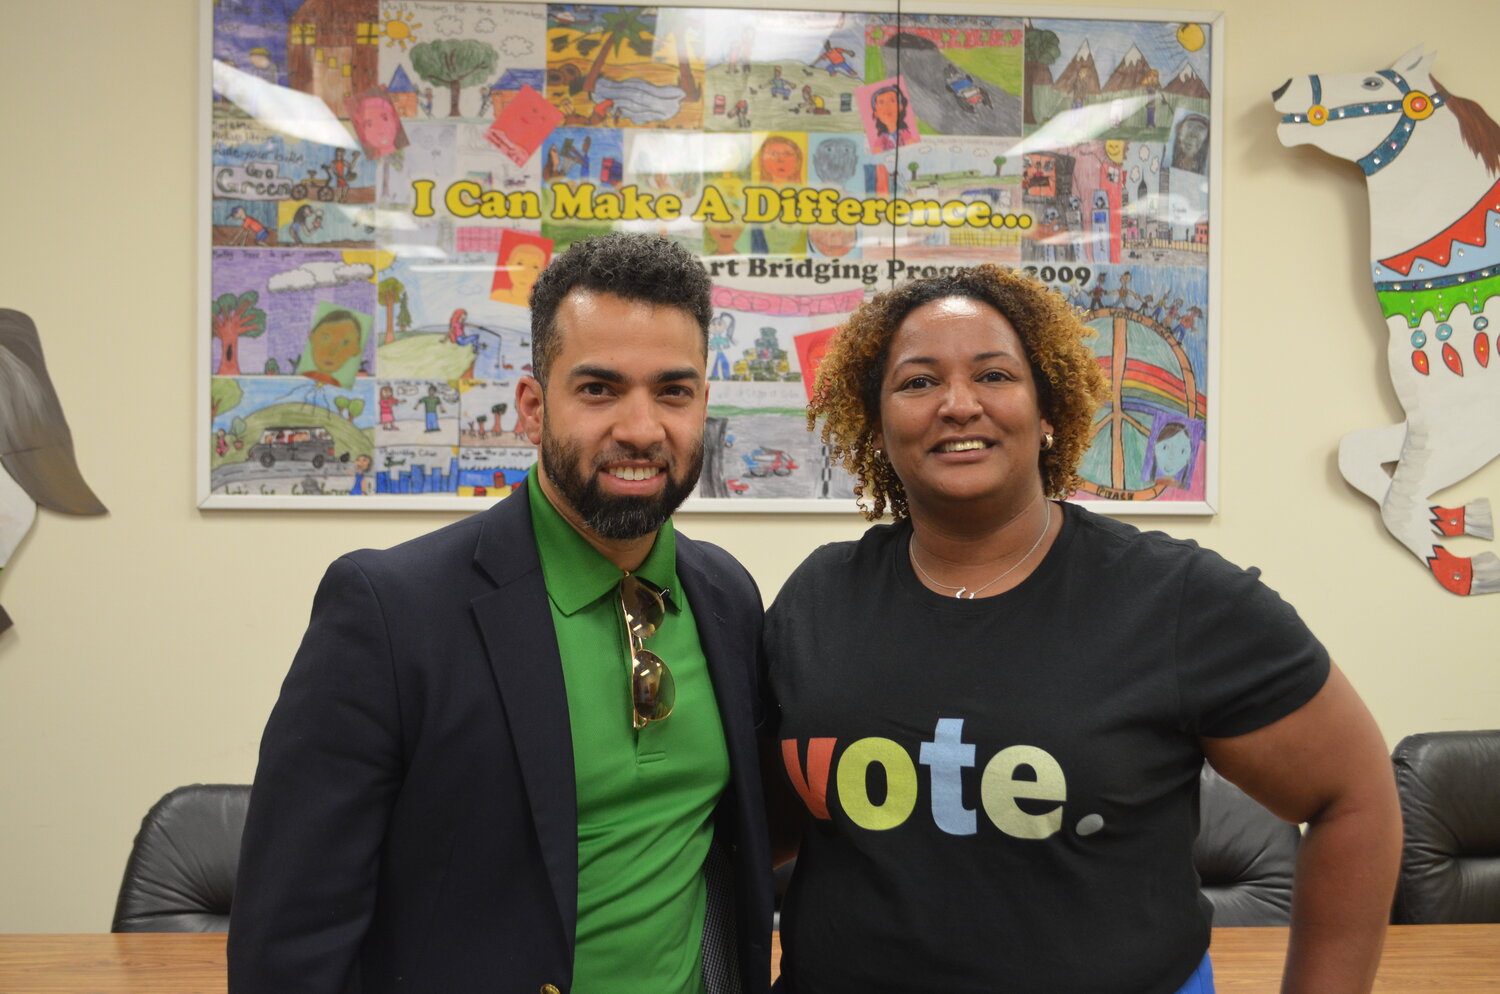 Angel Ramos, left, and Tiffany Capers were voted in as trustees for the Elmont Union Free School District education board Tuesday night. Ramos is new to the board, toppling longtime trustee Anthony Maffea.